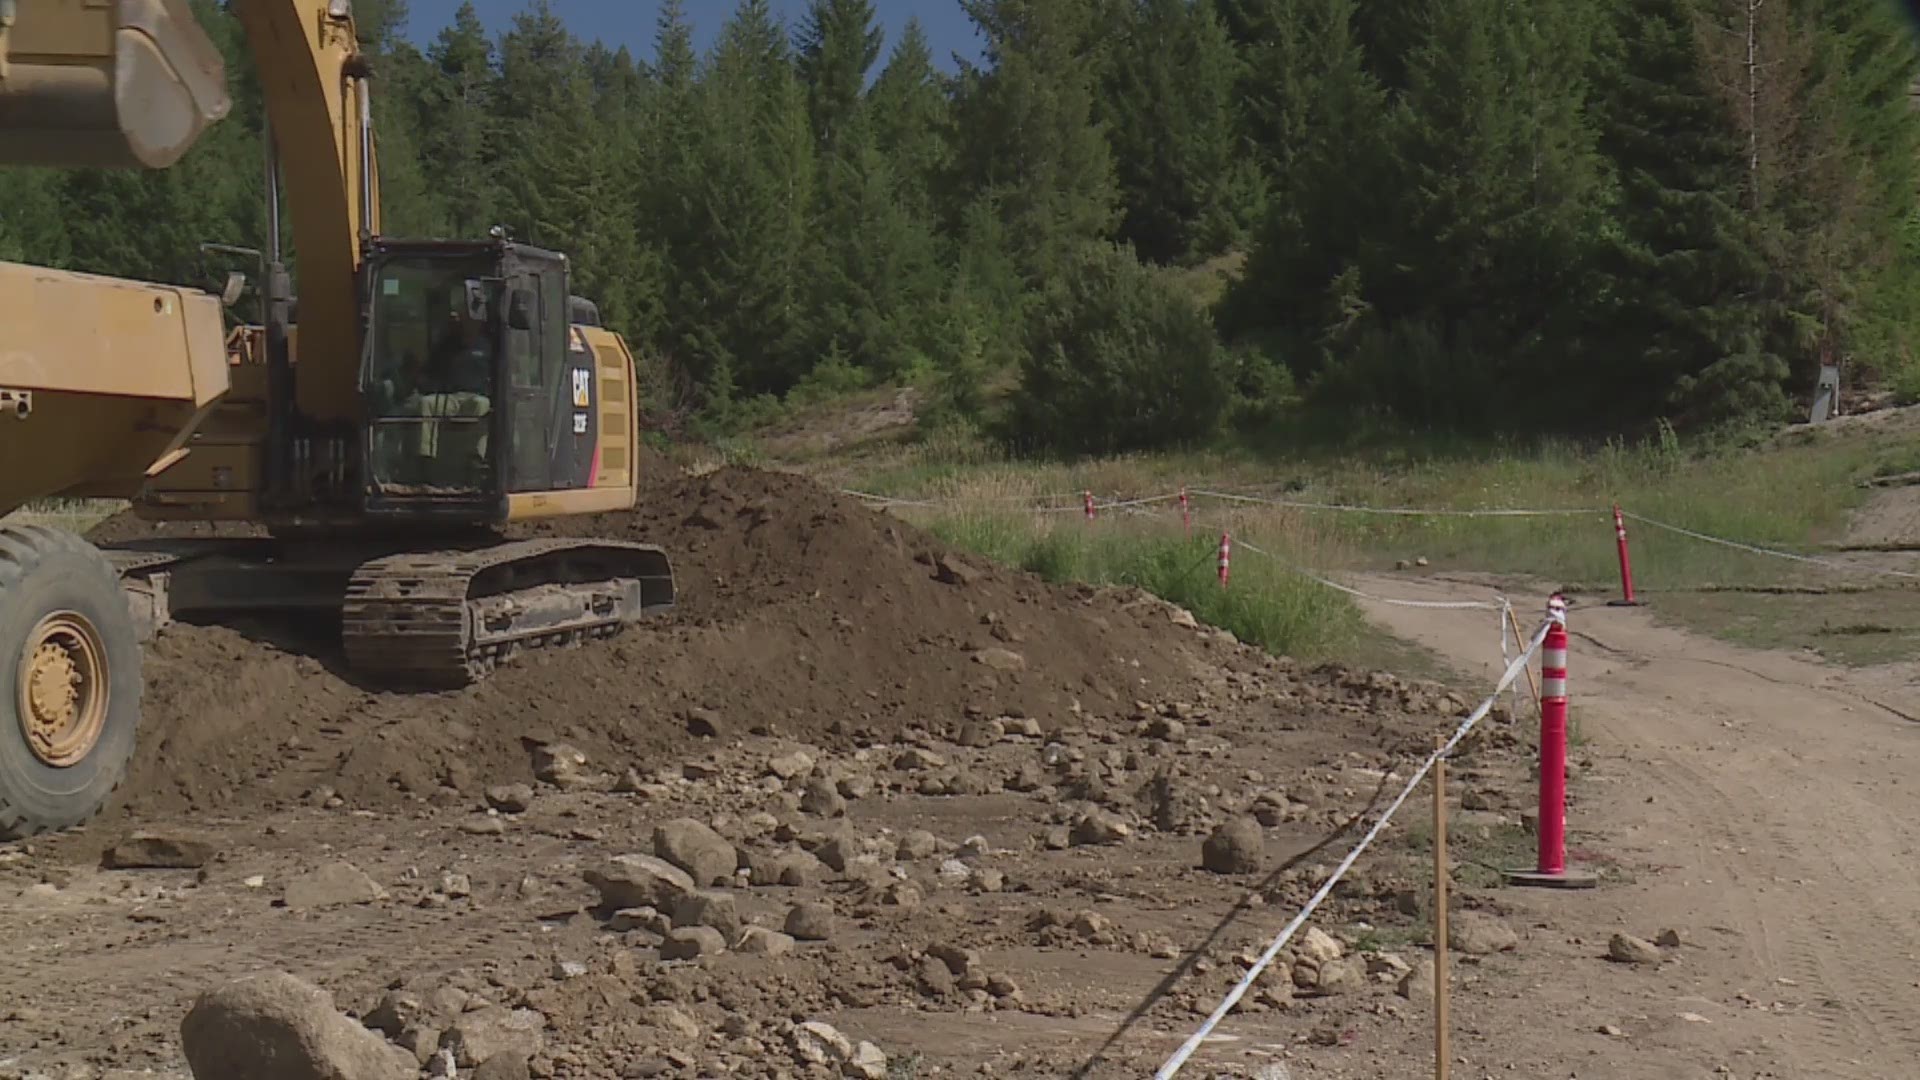 Work underway at Bogus Basin to build new chairlift